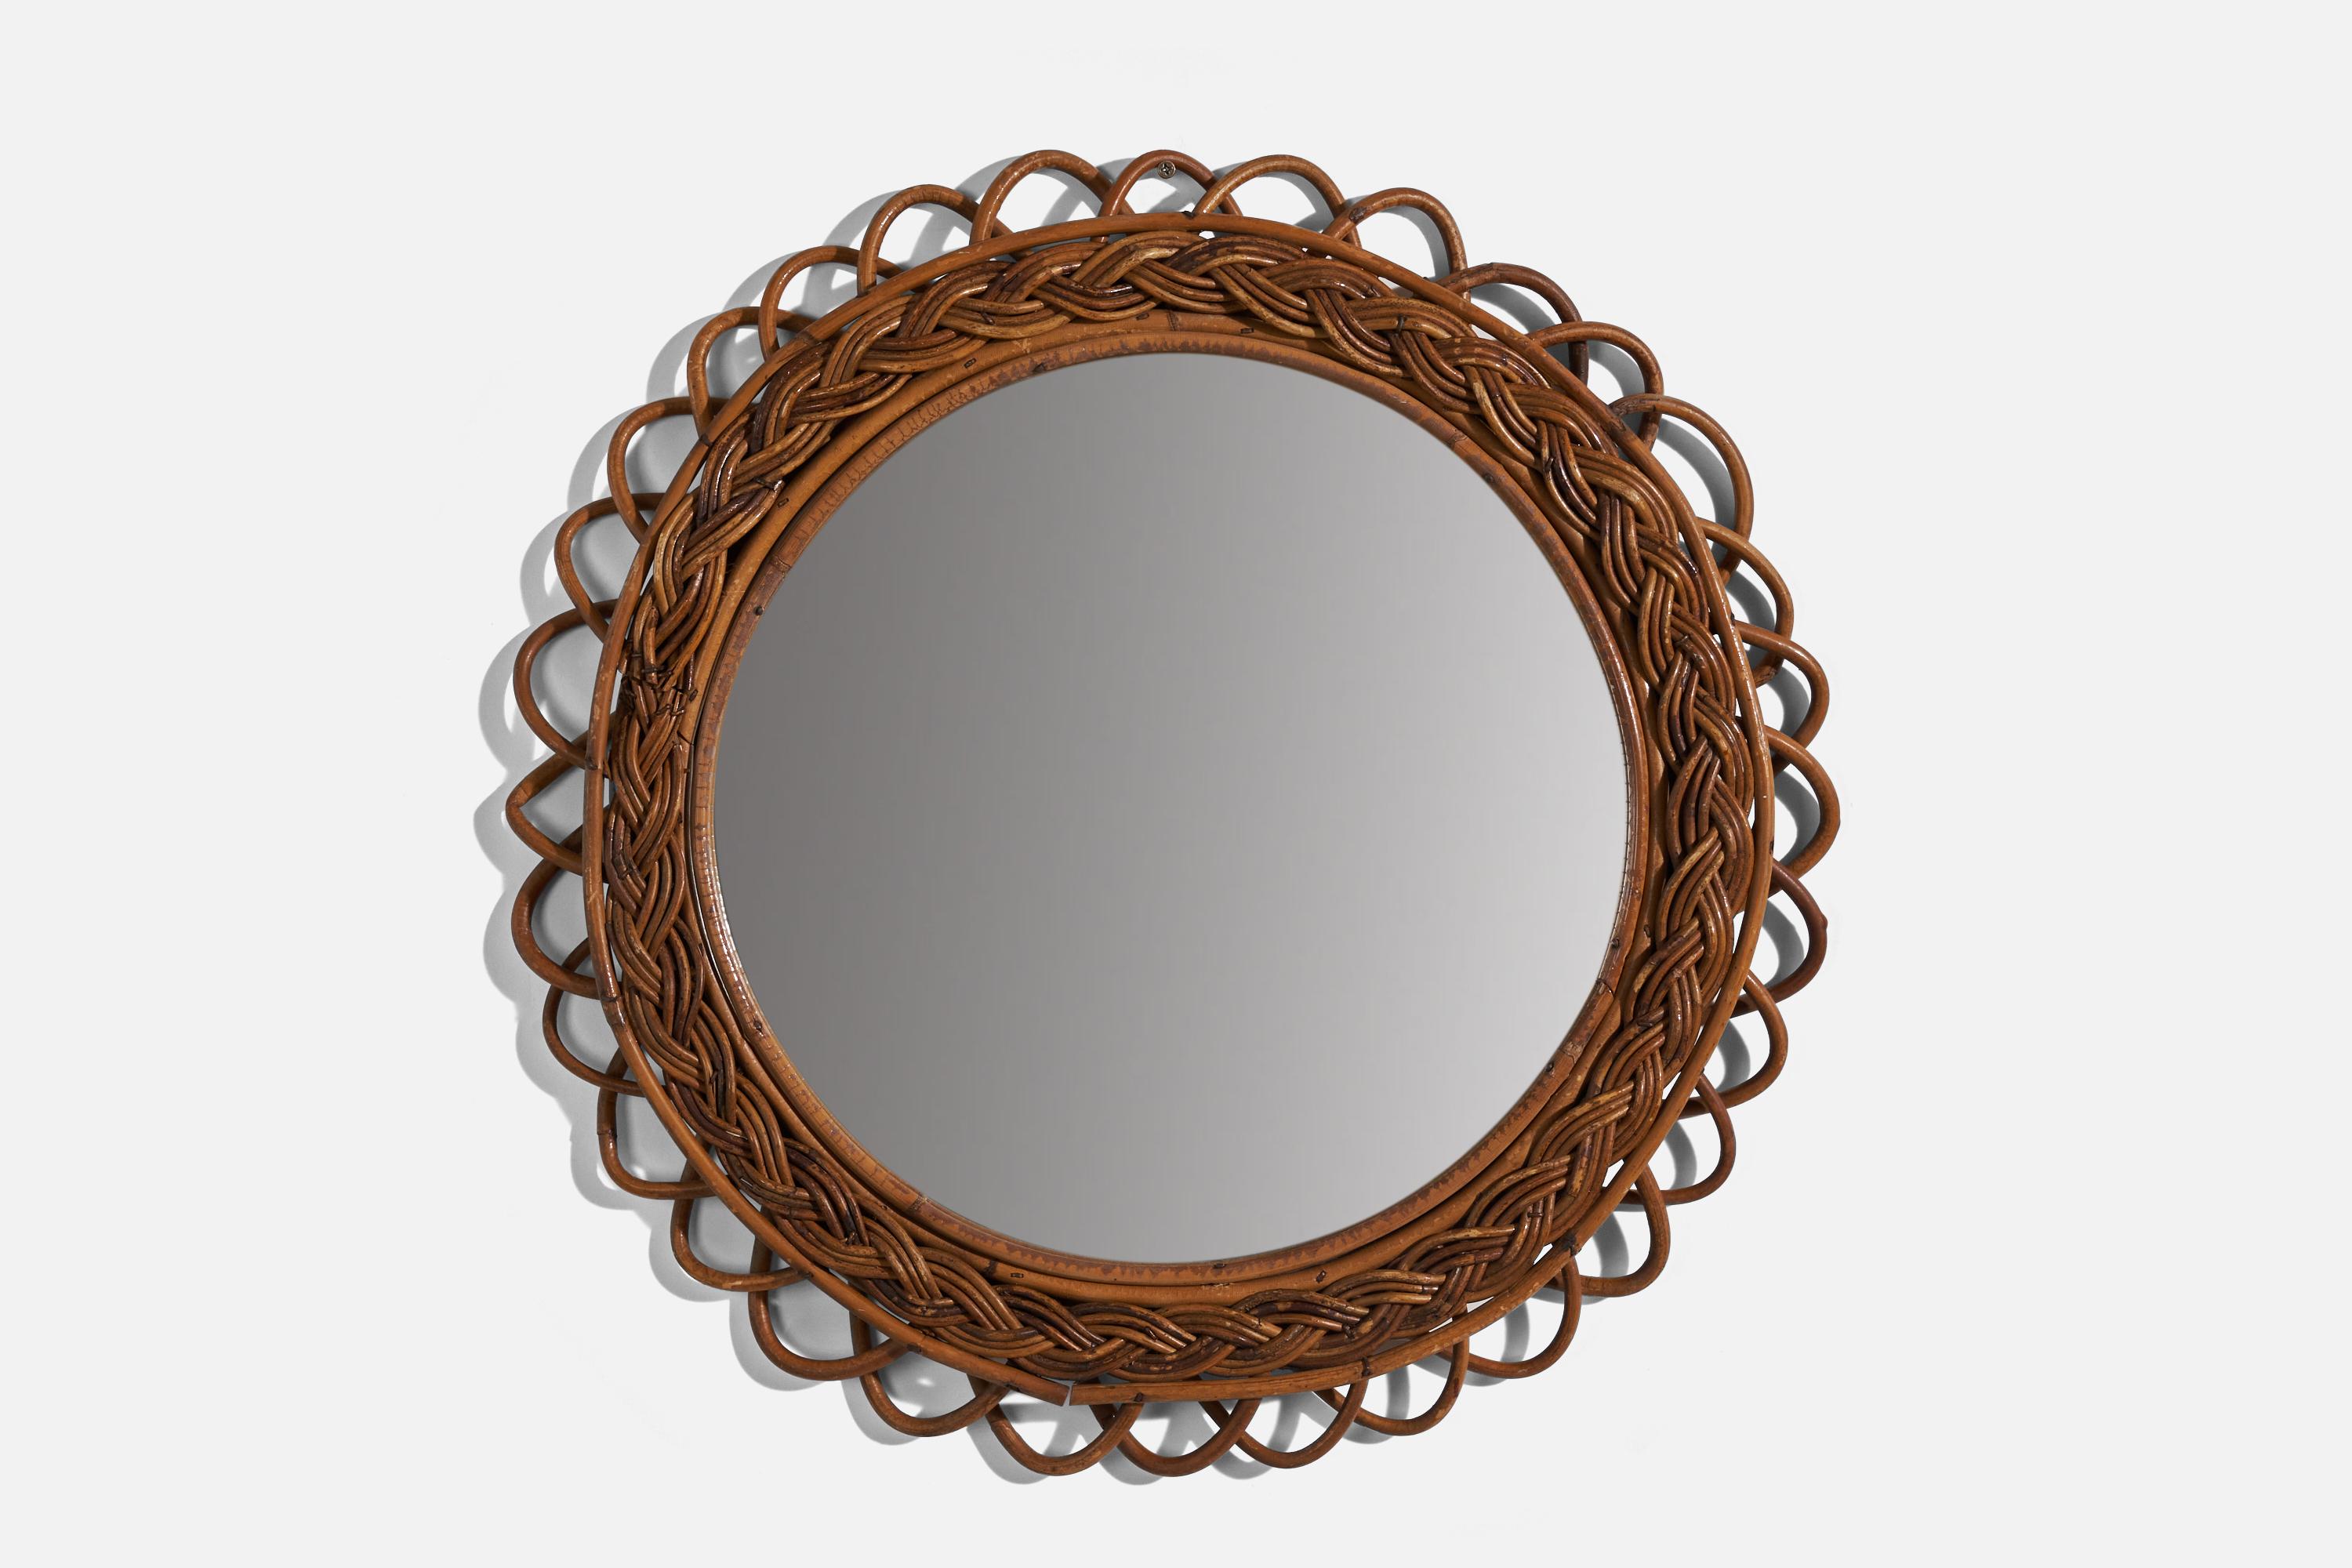 A woven rattan wall mirror designed and produced in Italy, 1950s. 